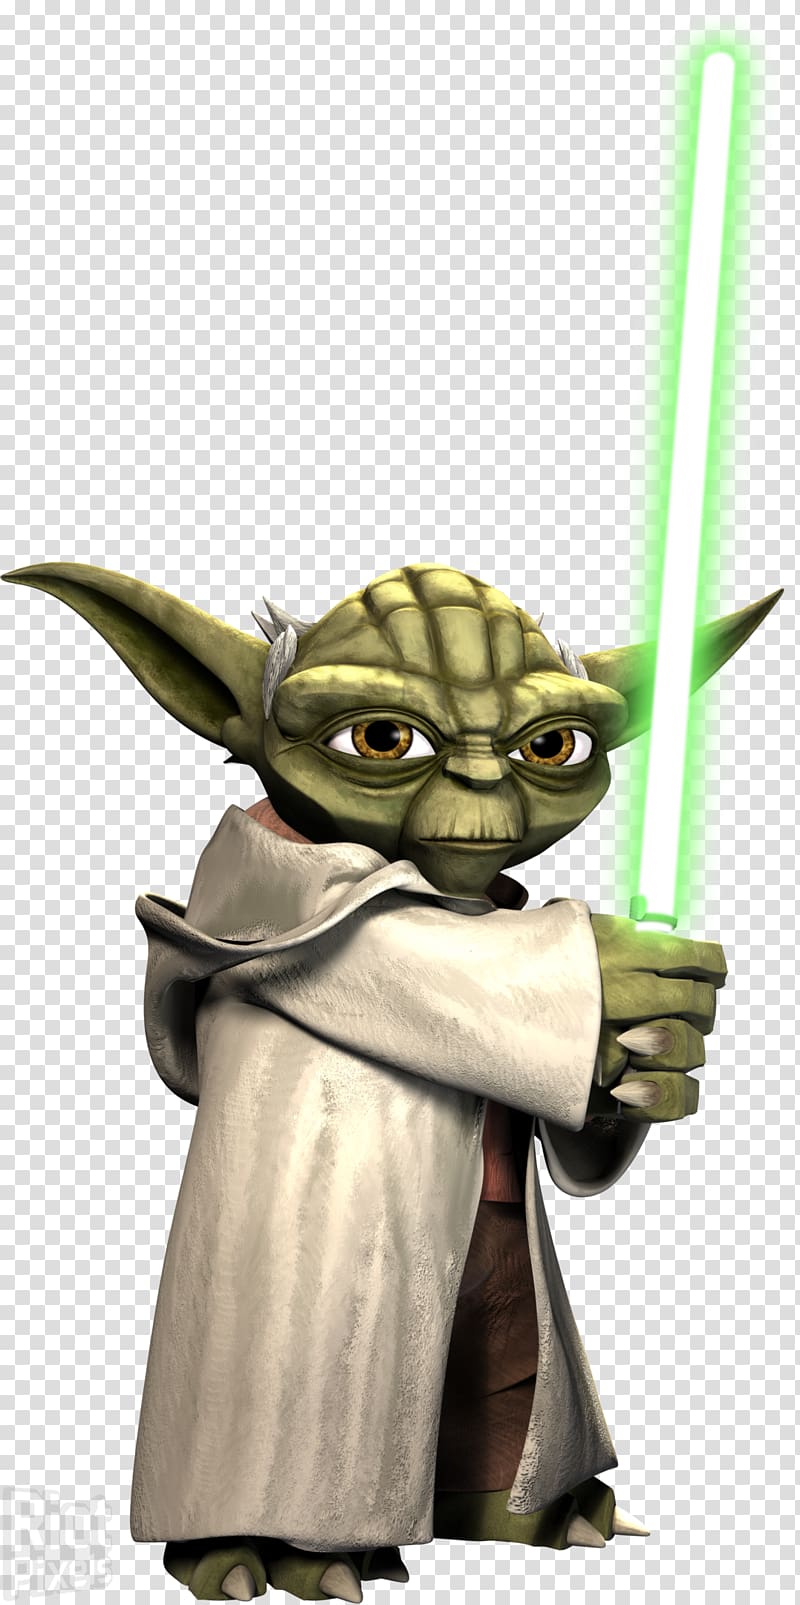 Yoda Star Wars: The Clone Wars Anakin Skywalker Darth Maul, others transparent background PNG clipart